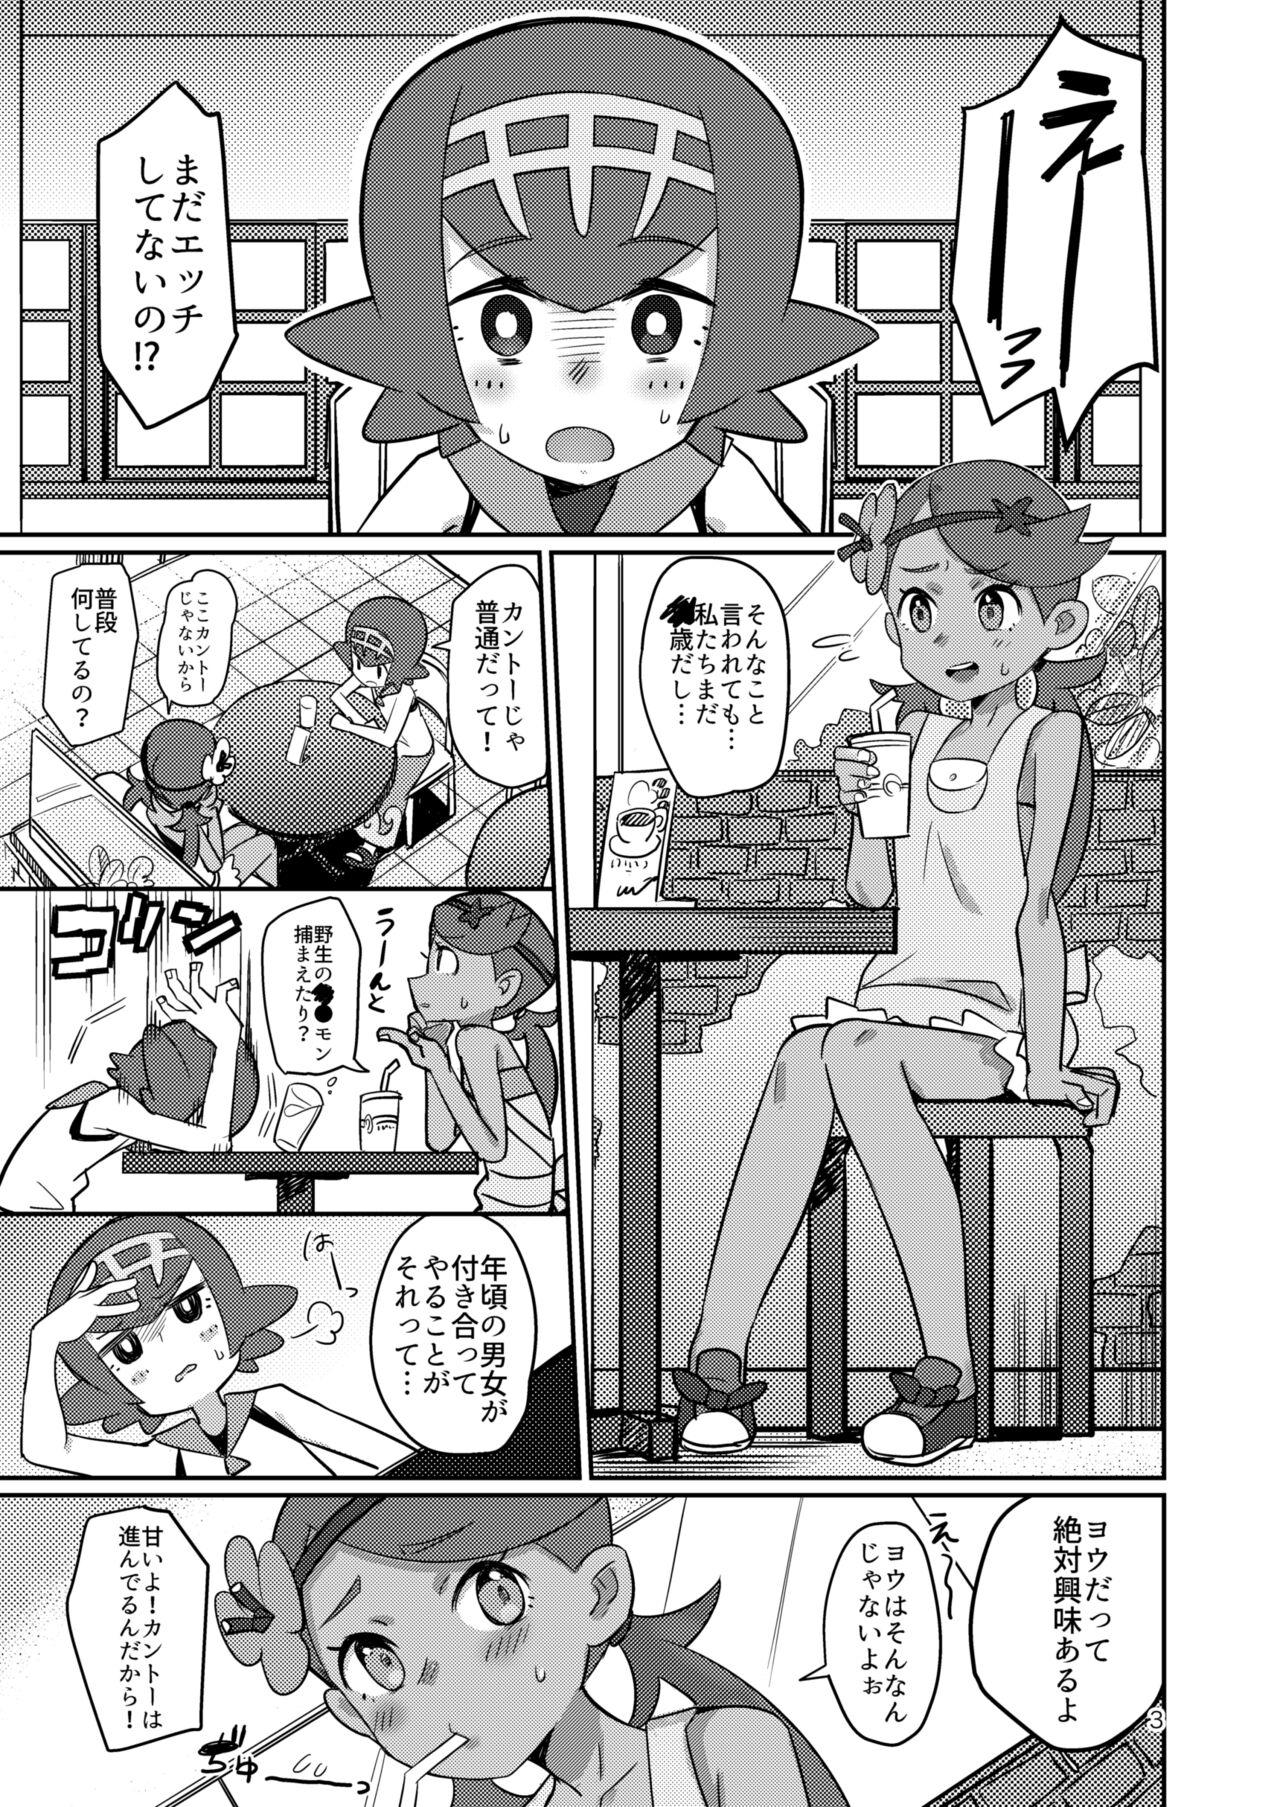 Lolicon ALOLA NIGHT - Pokemon | pocket monsters Missionary Porn - Page 2